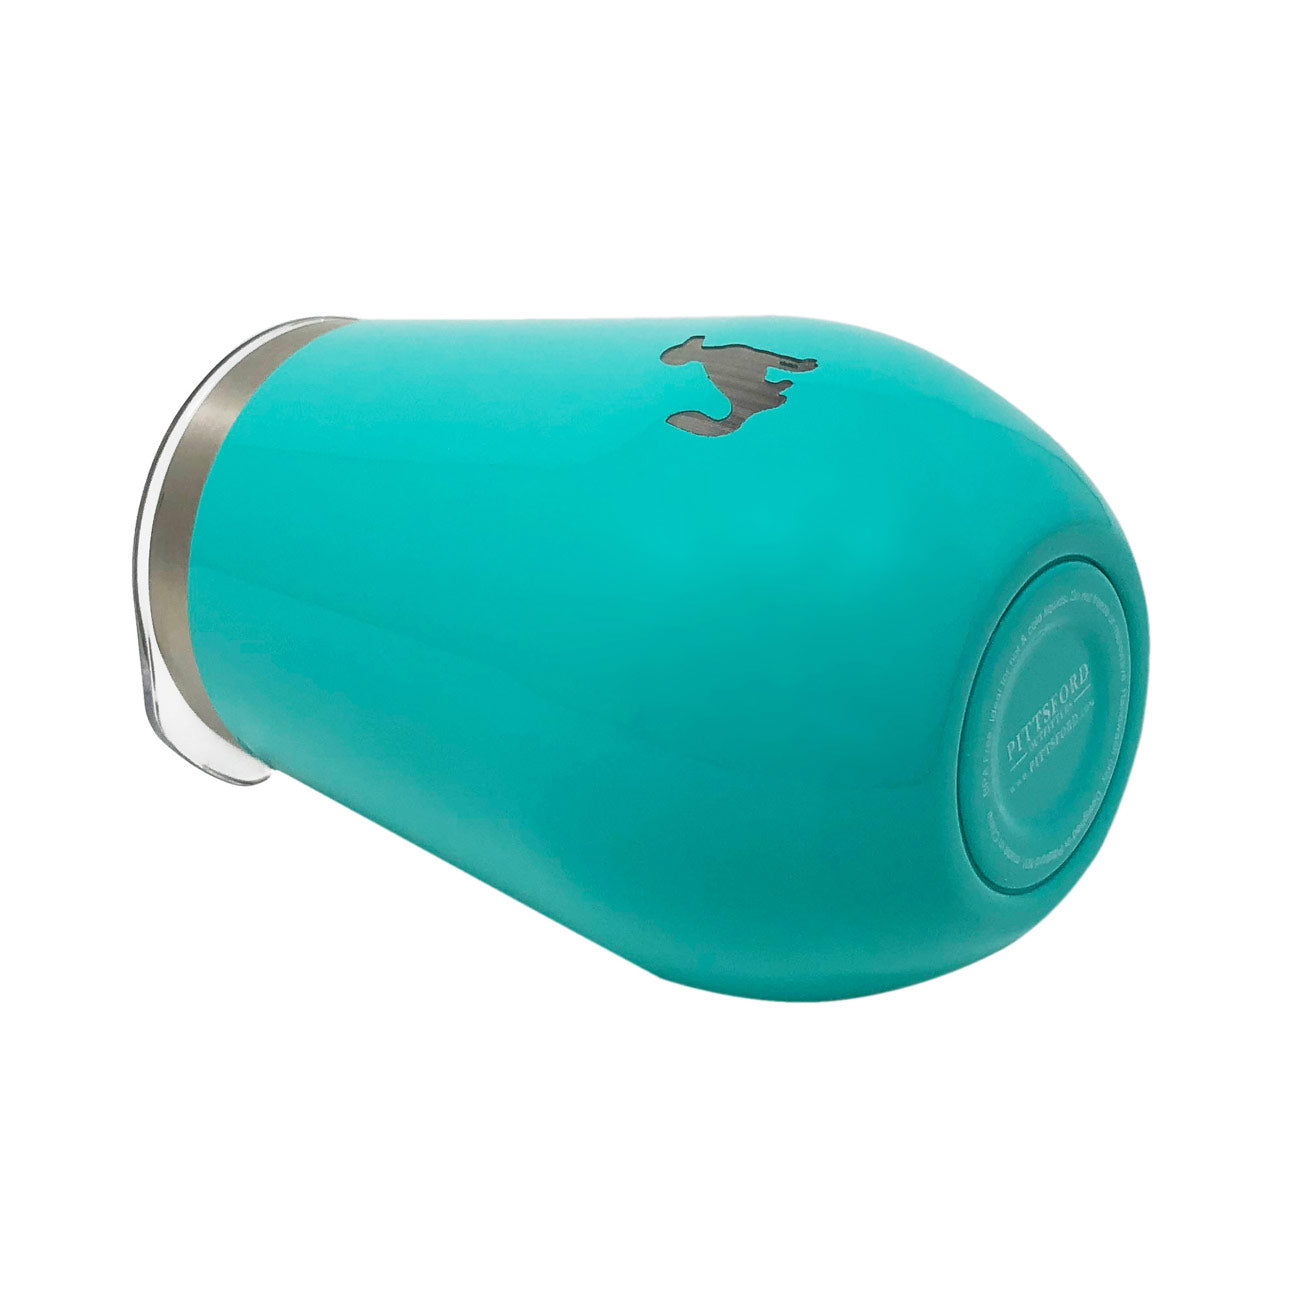 12oz Insulated Wine Tumblers - Favorite Fish – The Murphy Collective LLC